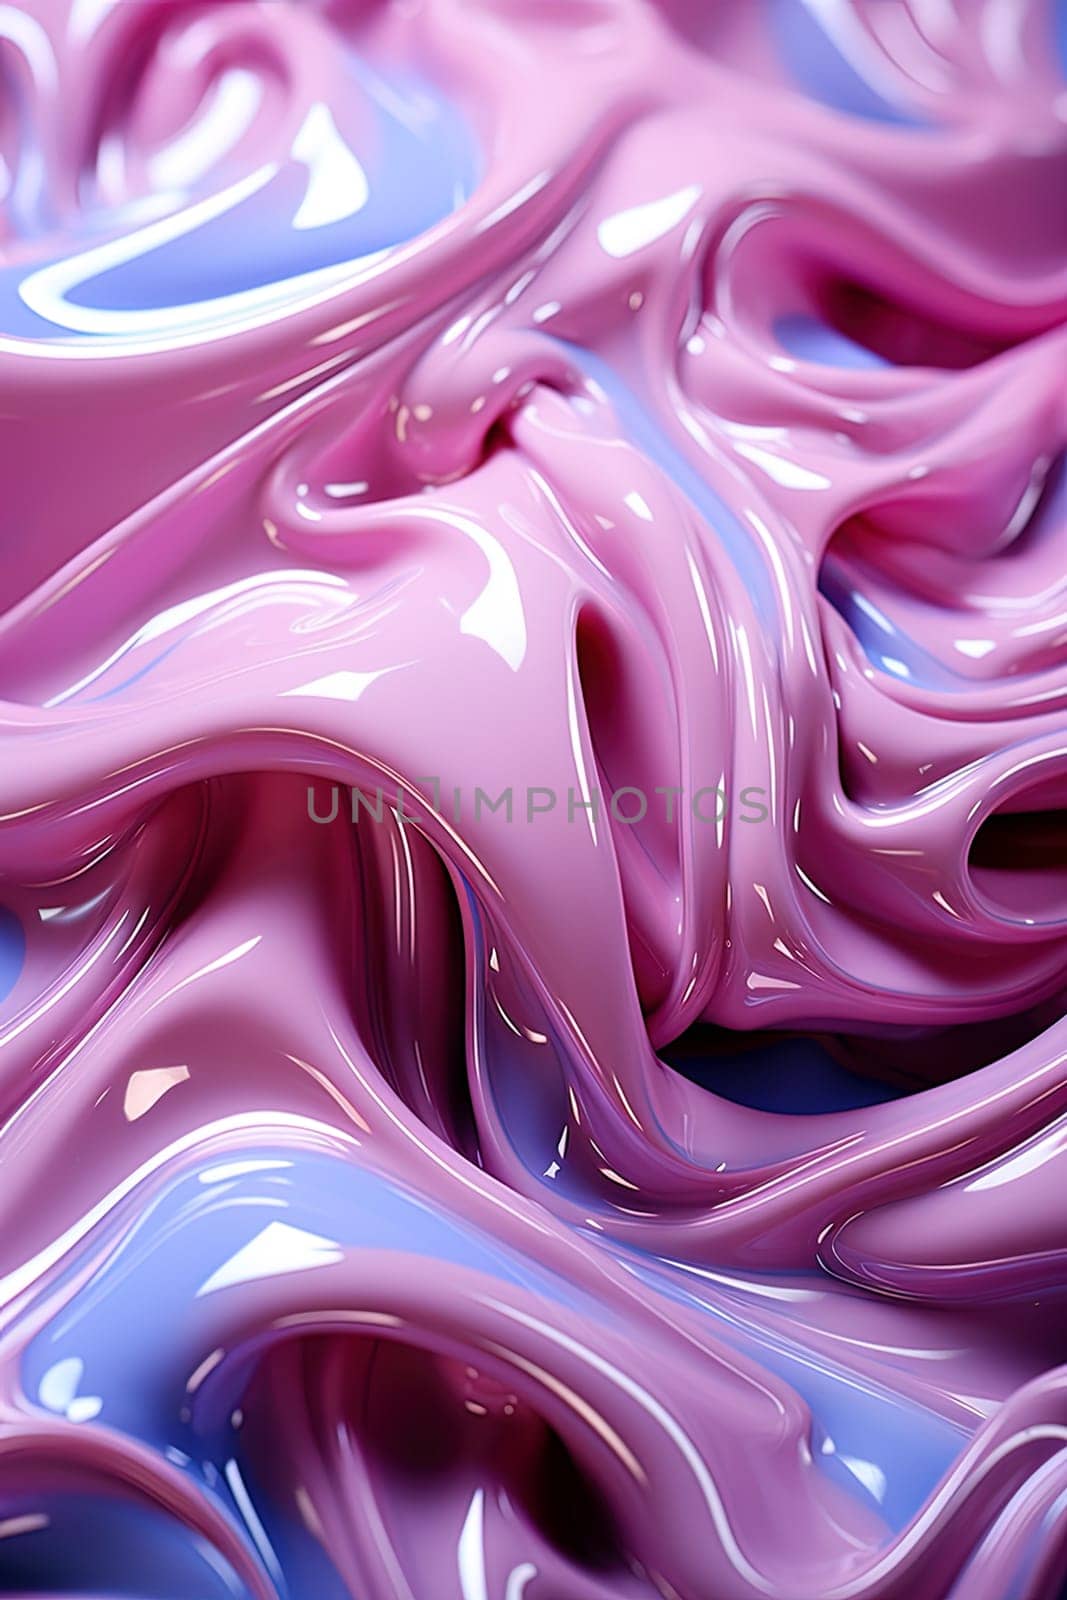 Liquid abstract pink and blue background with drops by Dustick